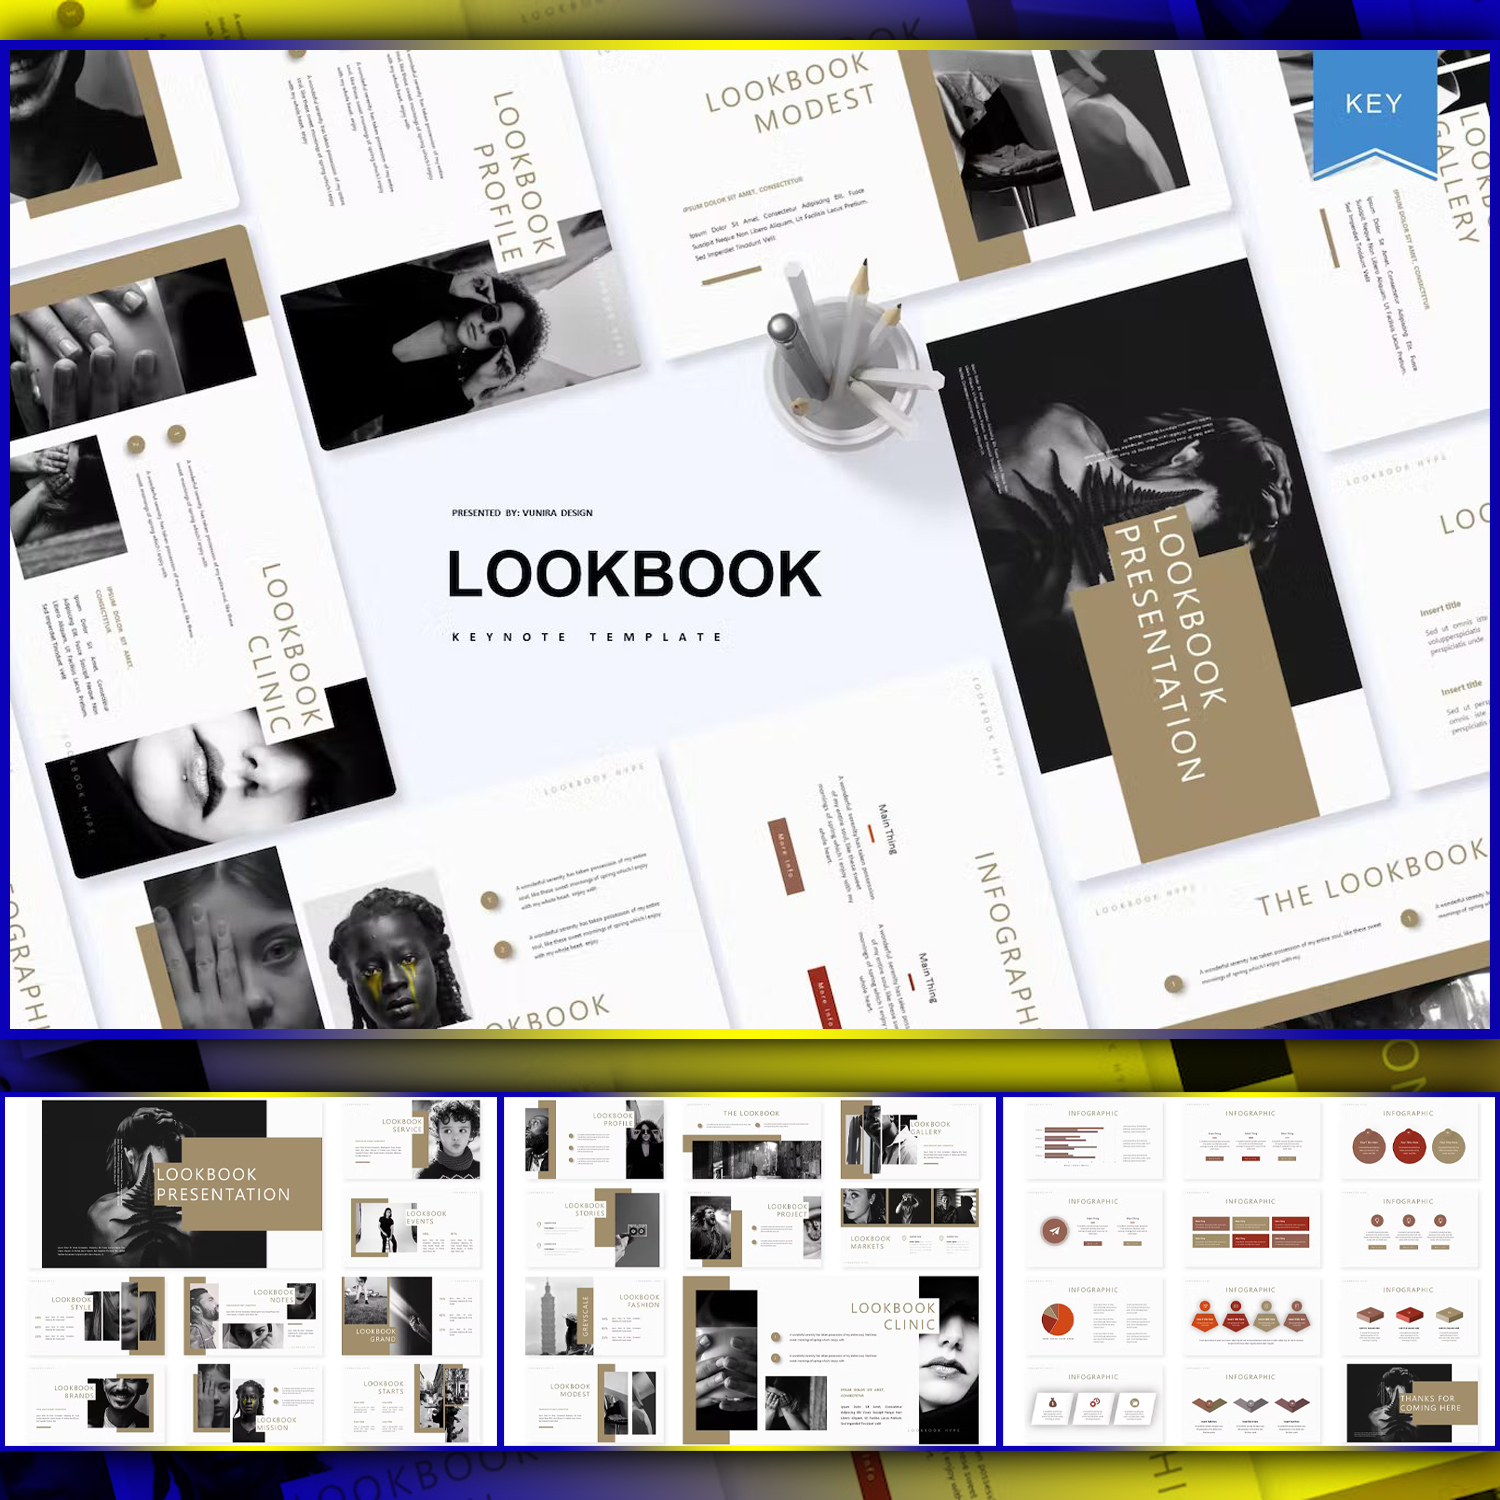 Images preview lookbook keynote template.